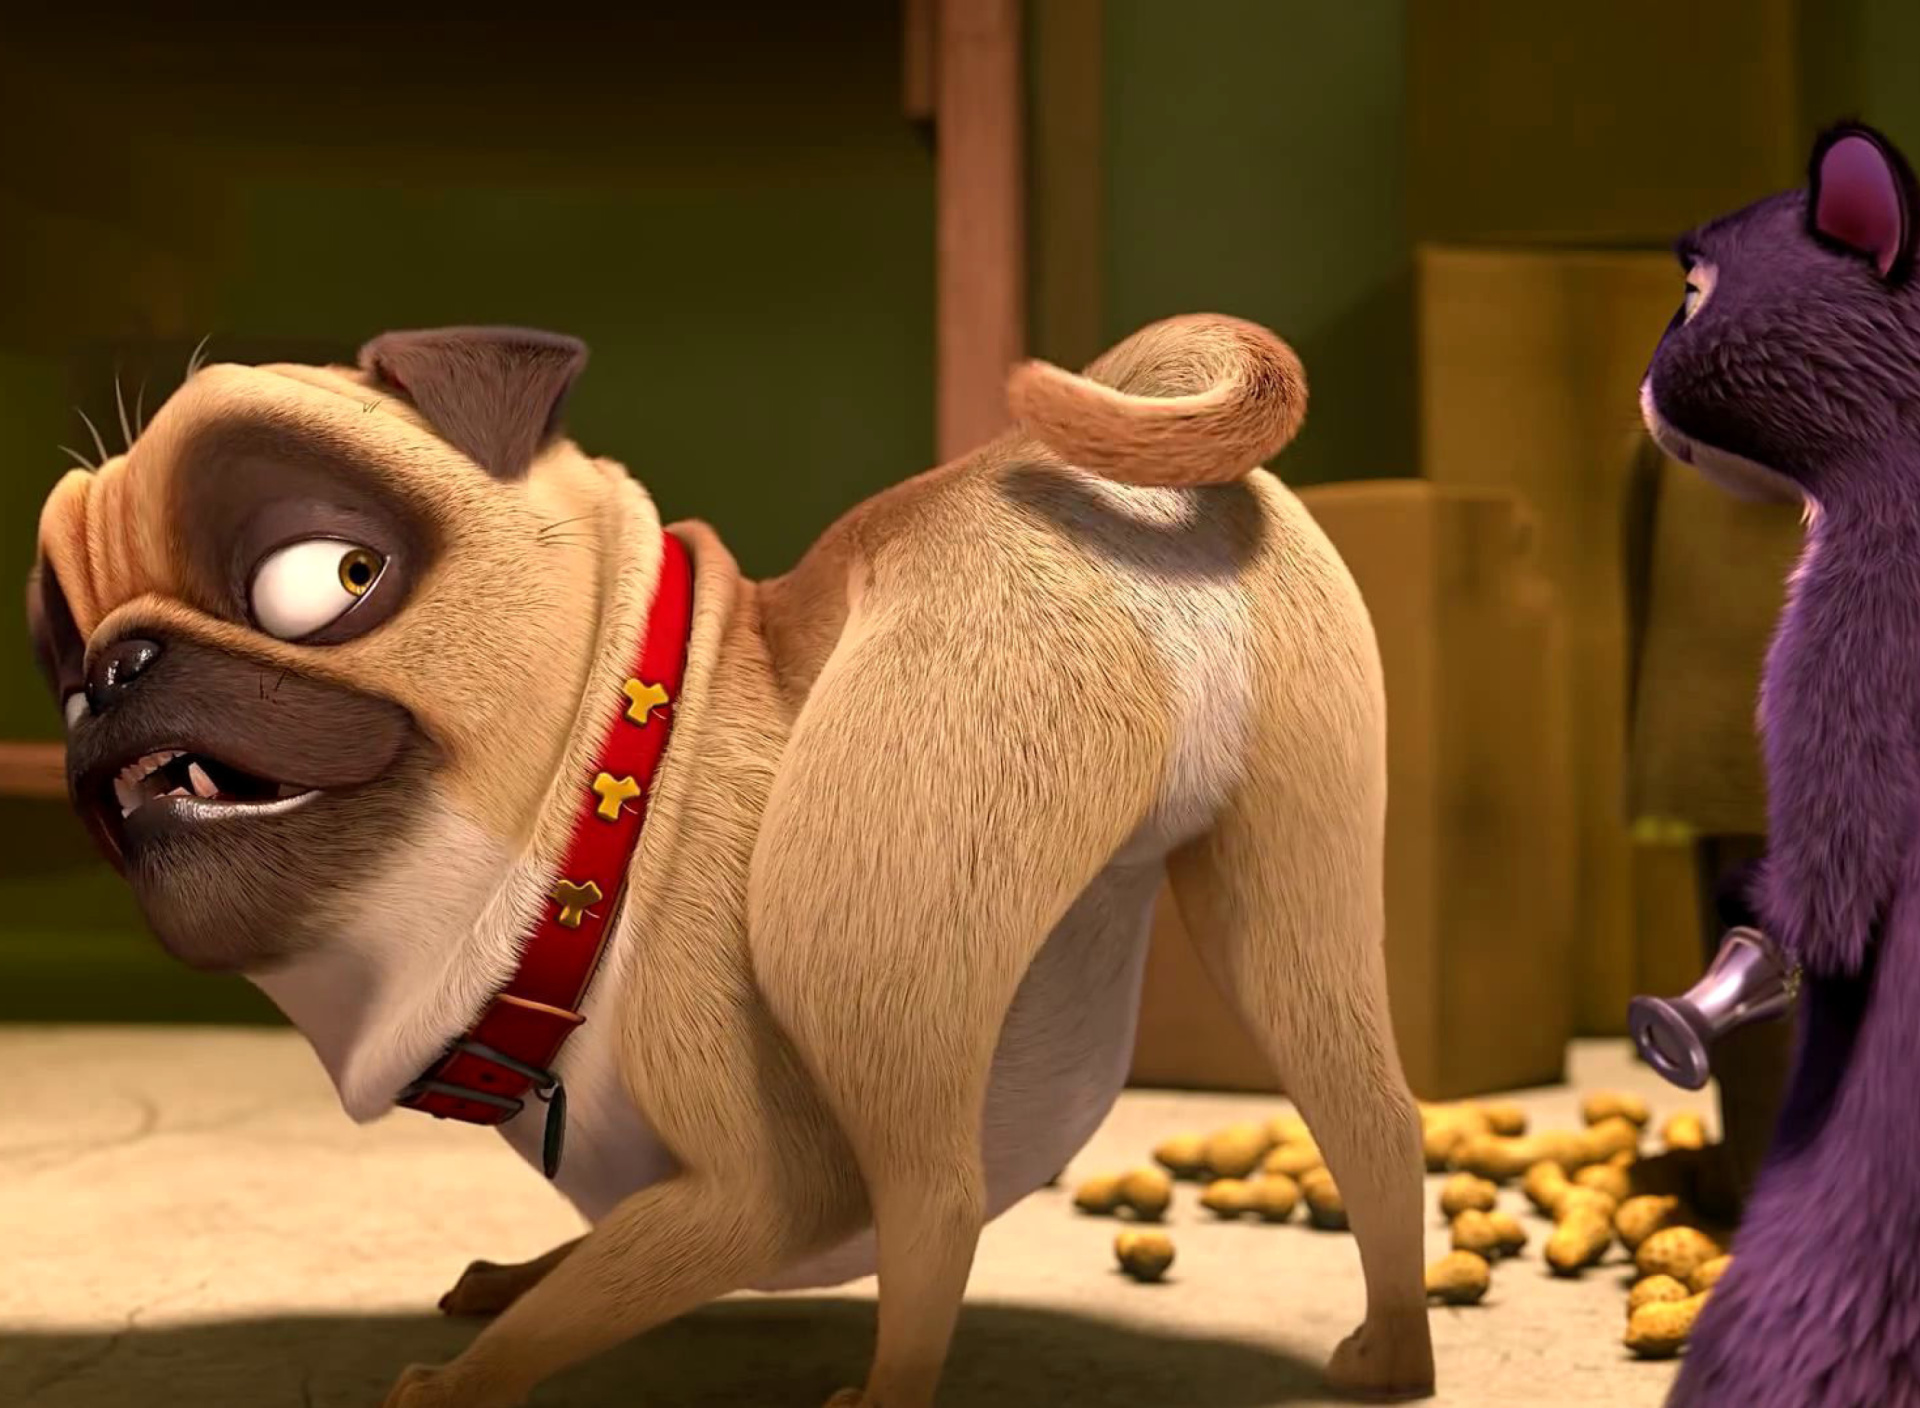 Precious and Surly in The Nut Job screenshot #1 1920x1408